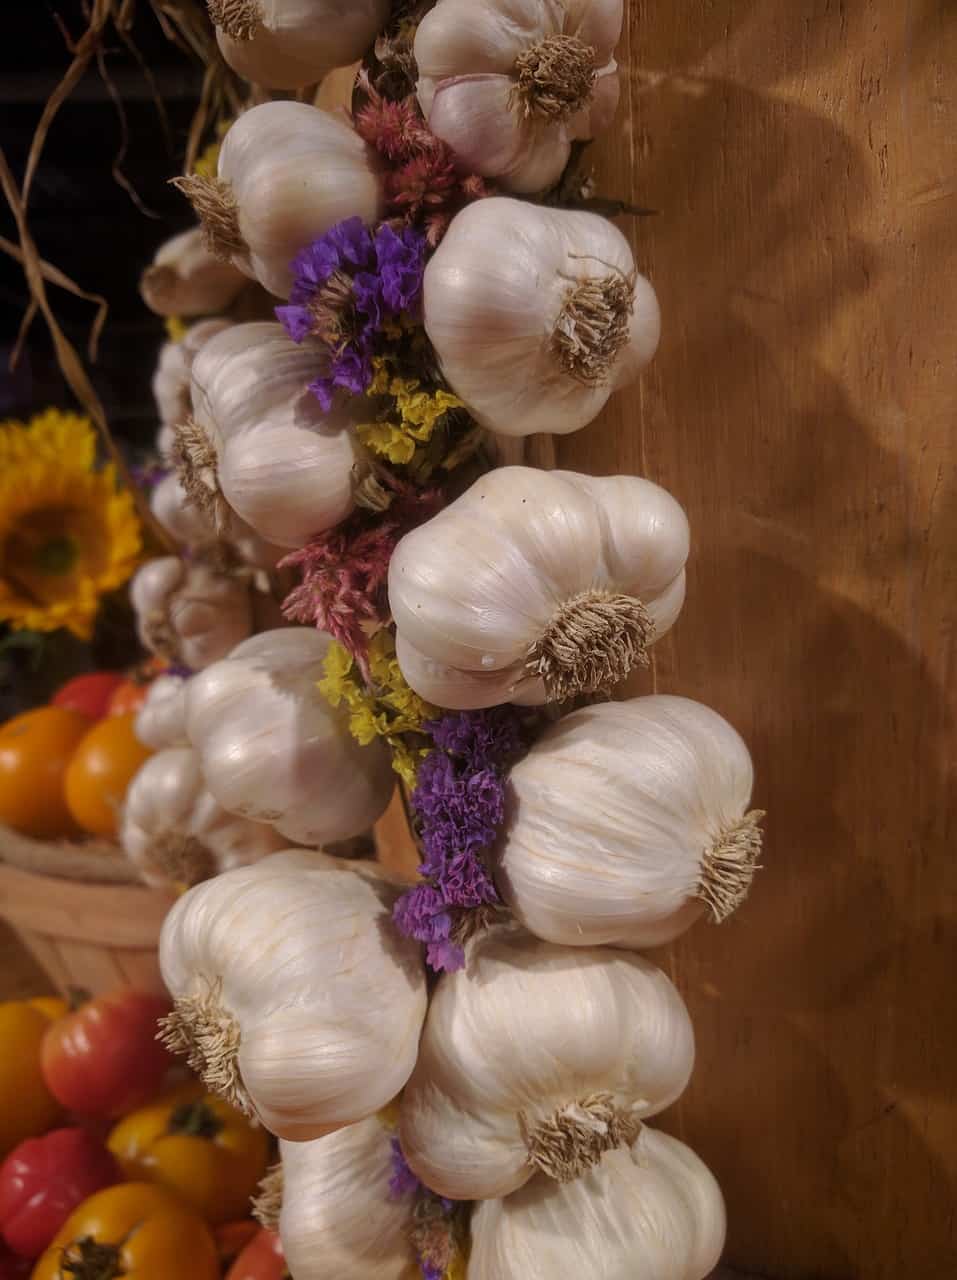 Braid your garlic to really stand out at market and make more sales!